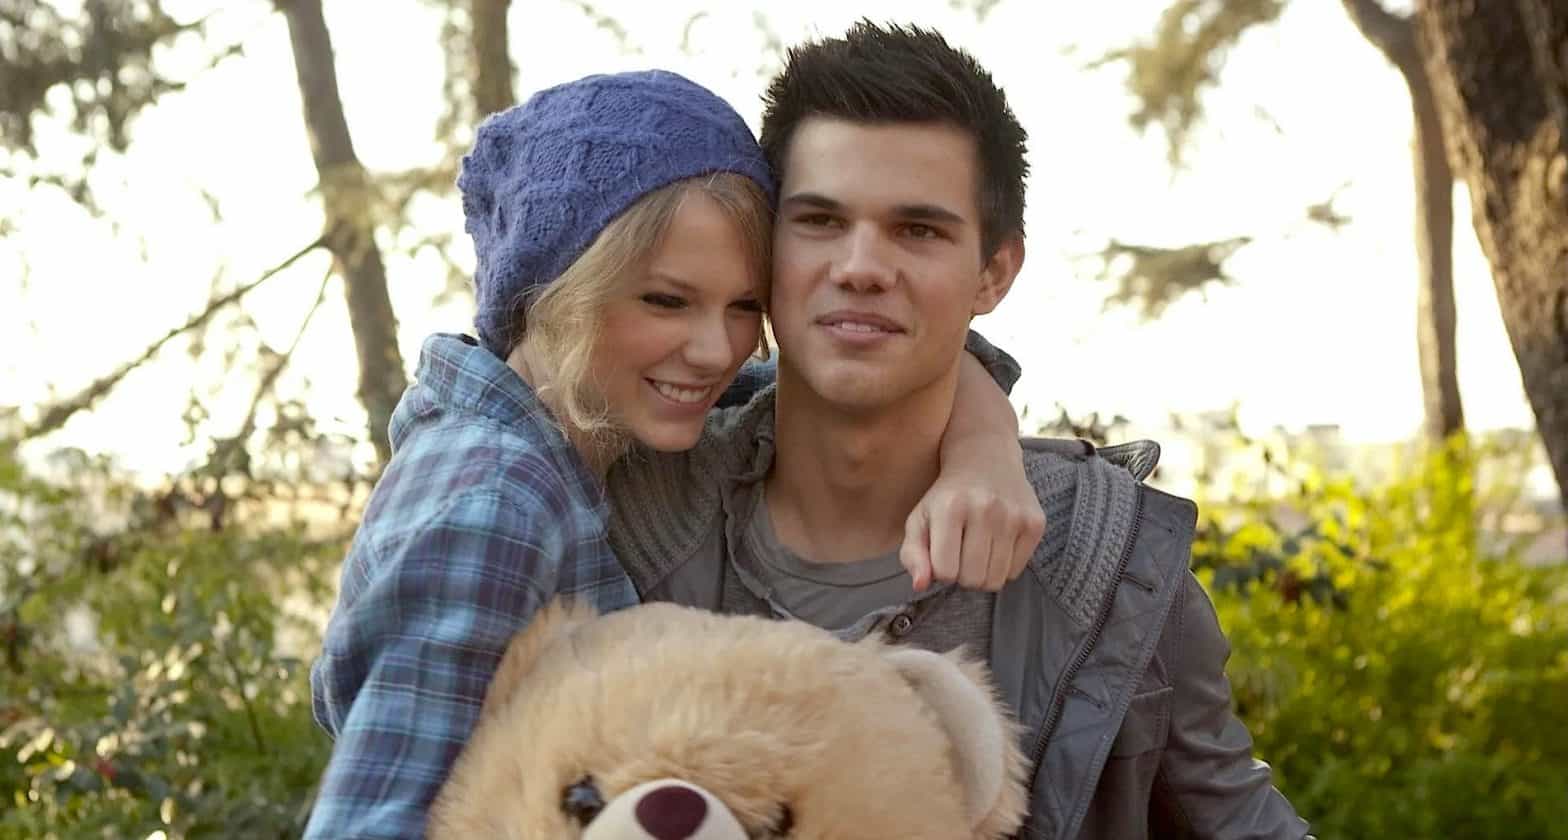 Who Did Taylor Swift Cheat on Taylor Lautner With